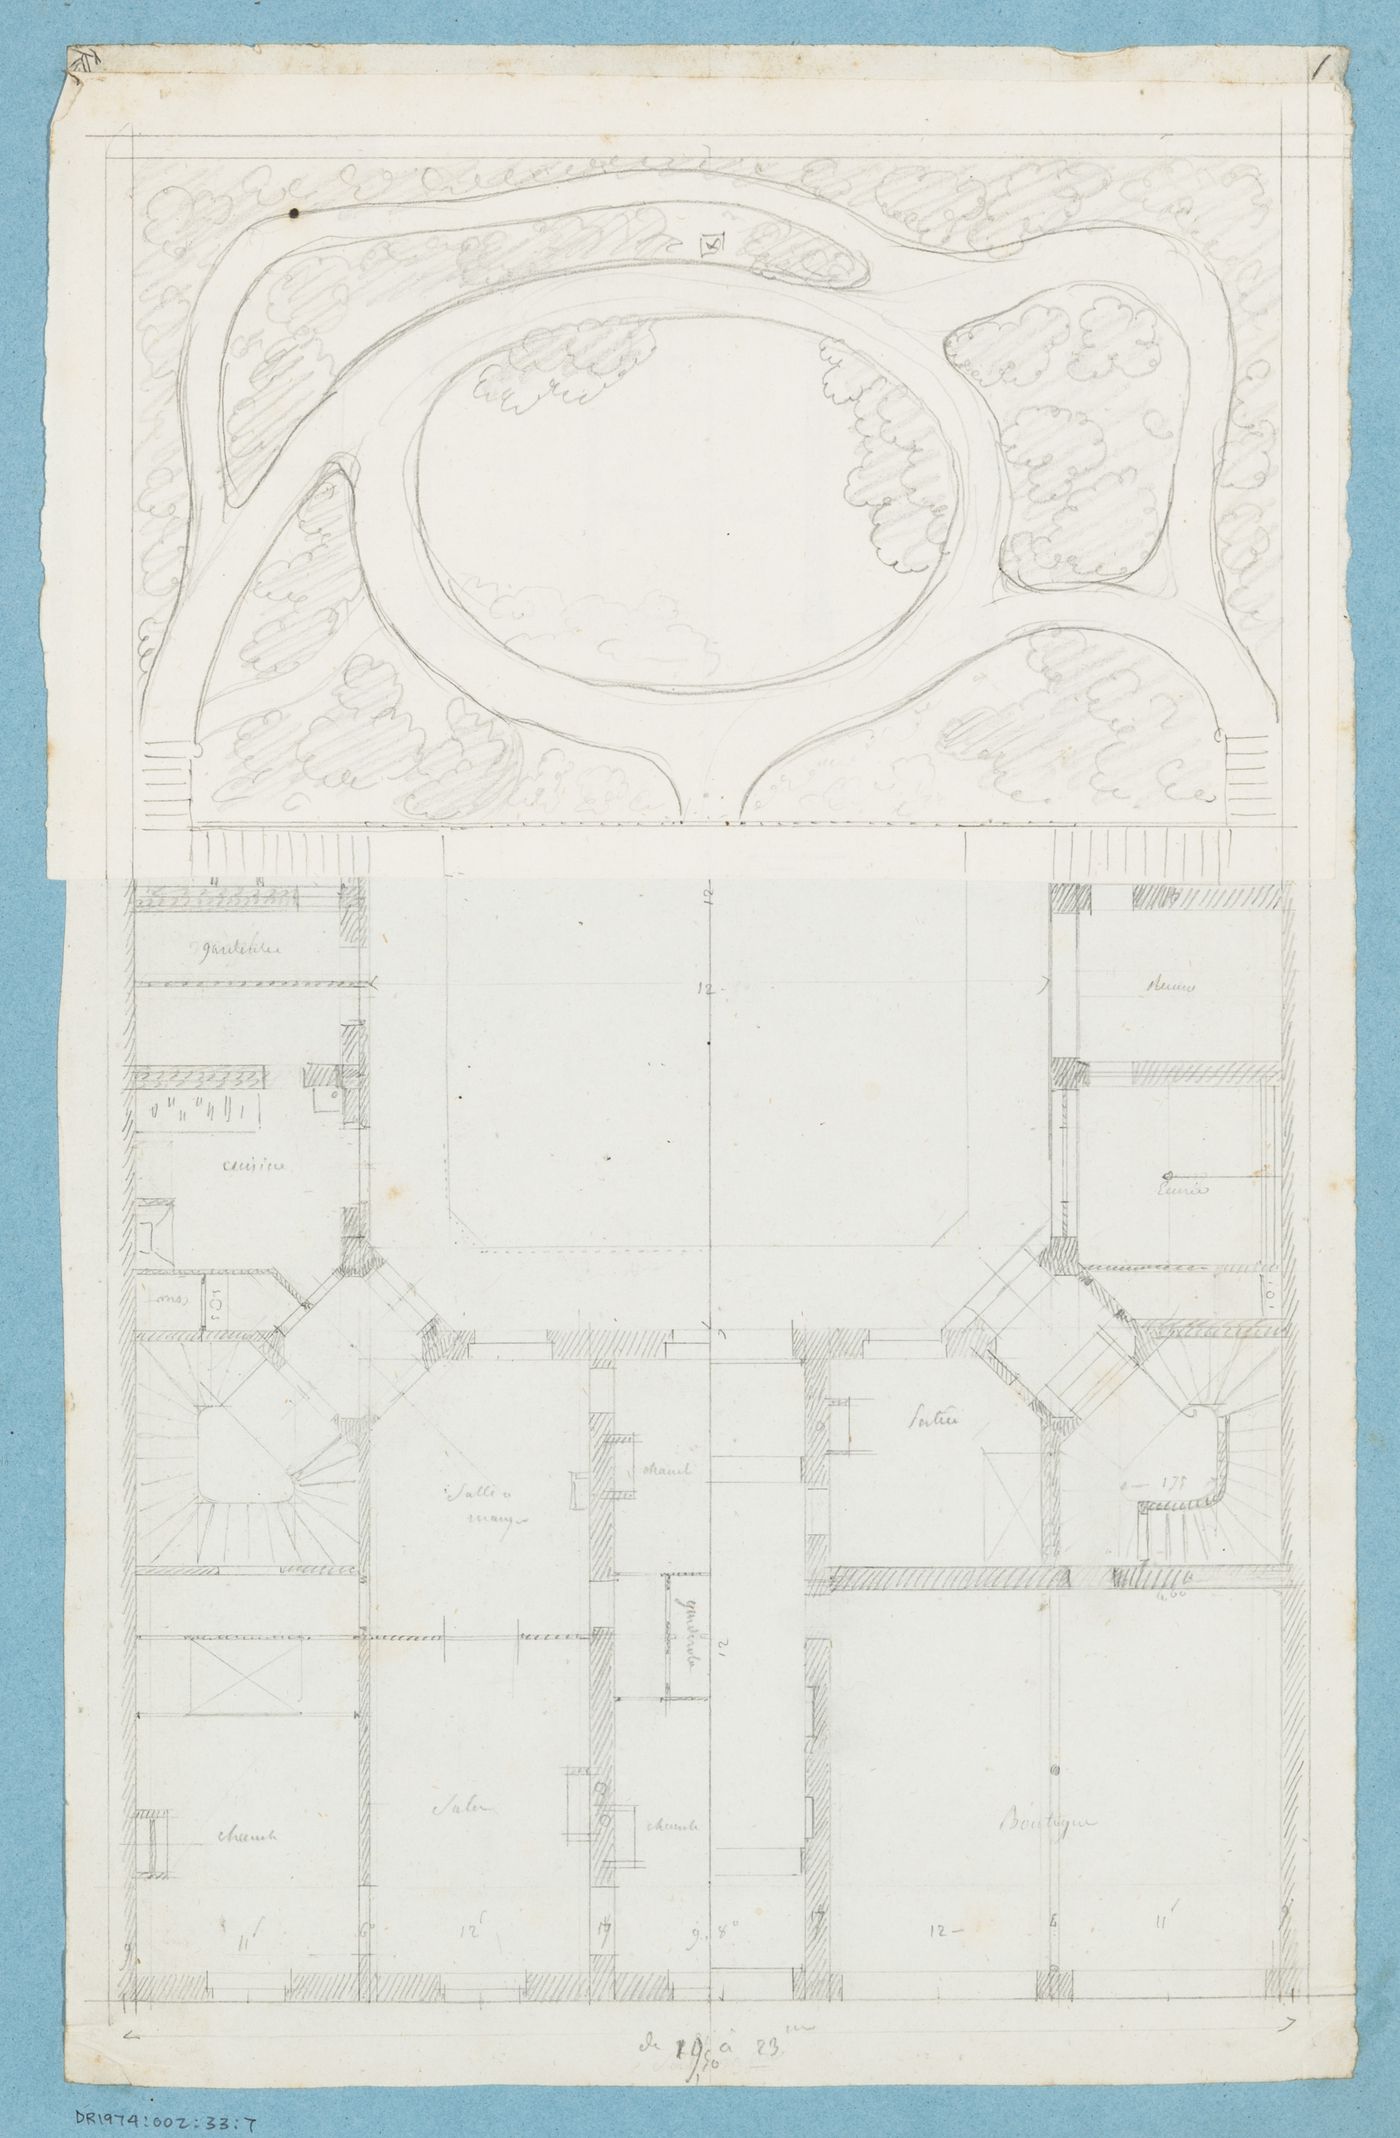 Project for a hôtel for M. Busche: Ground and first floor plans for a four-storey hôtel showing two alternate designs